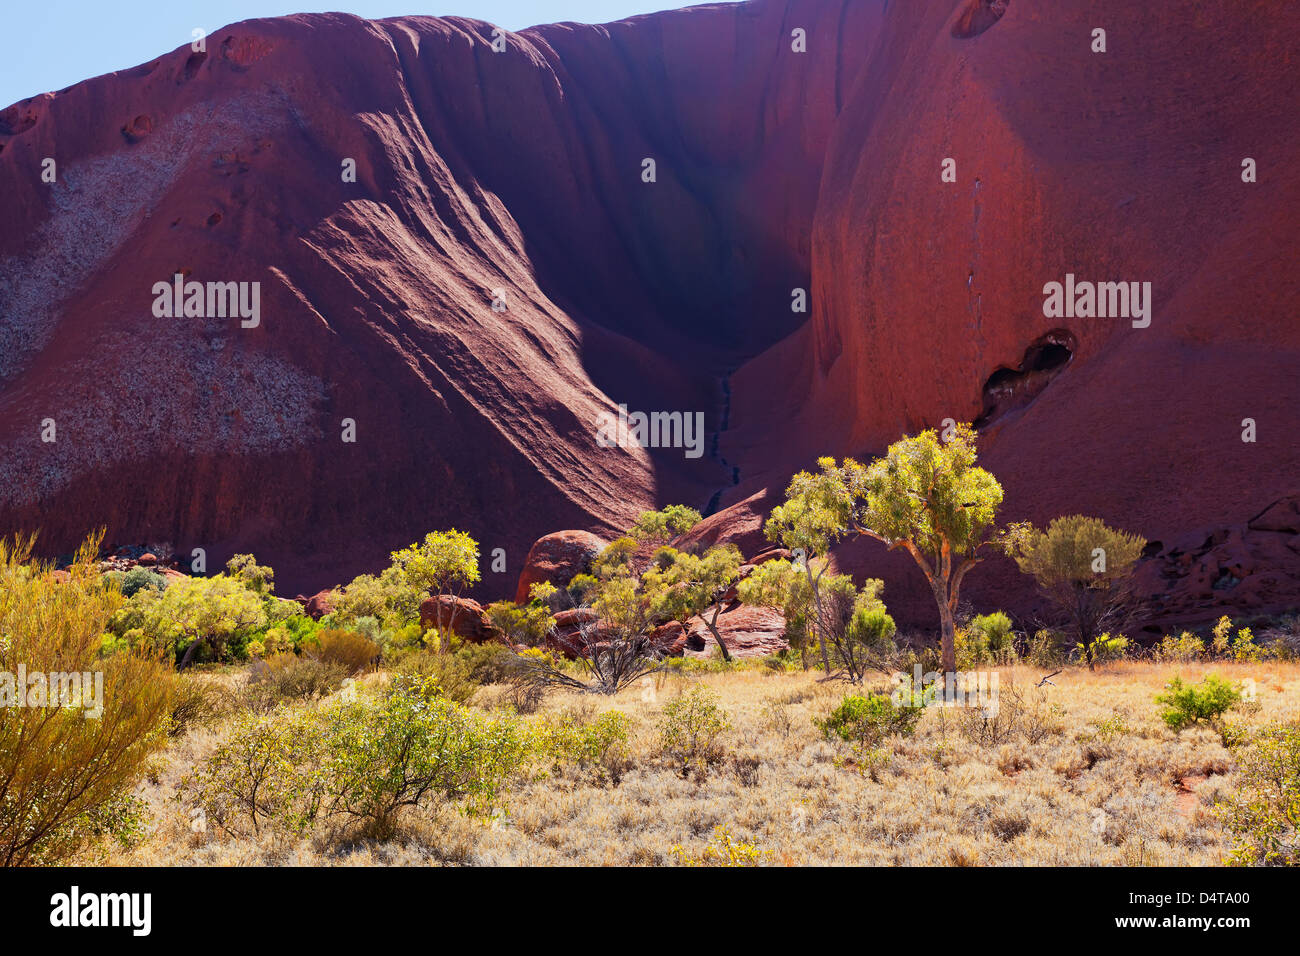 Outback central Australia Northern Territory landscape landscapes outback Ayers Rock Uluru Stock Photo